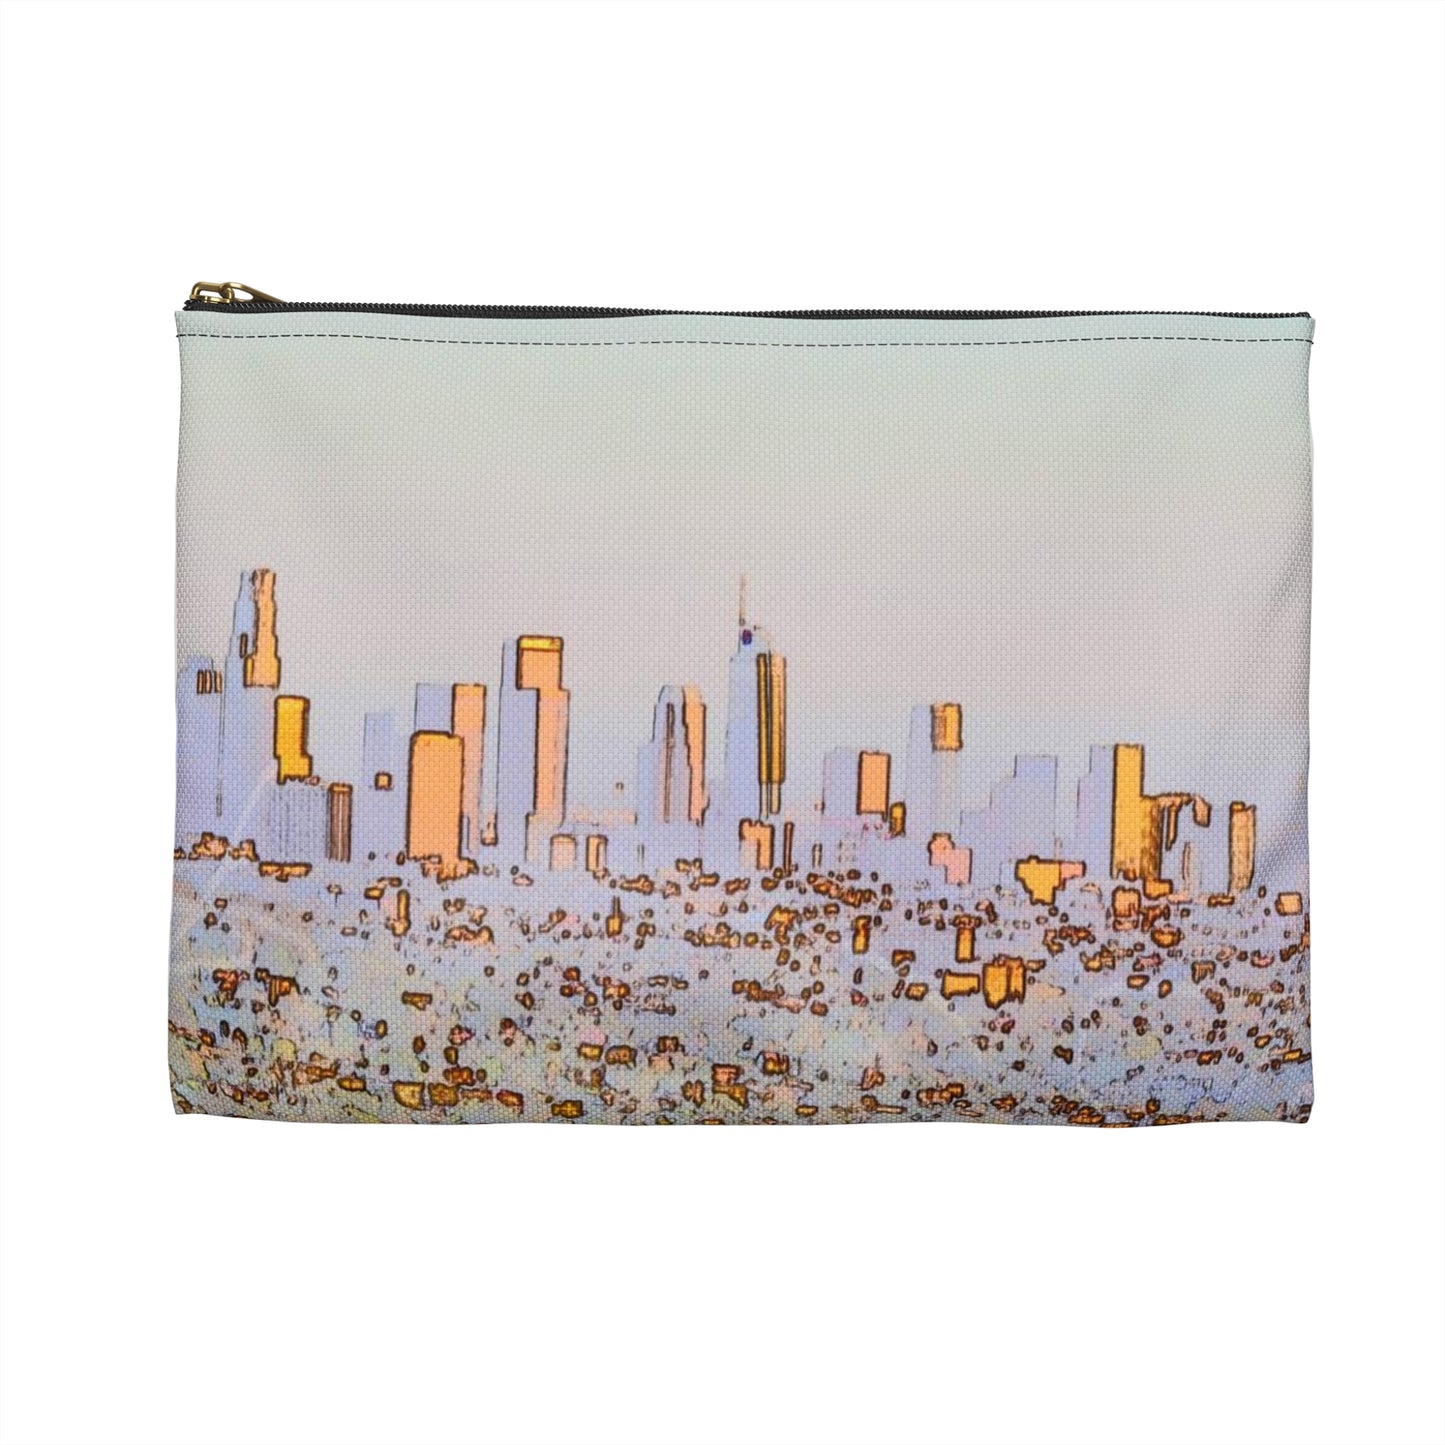 Shining City on the Hill accessory pouch